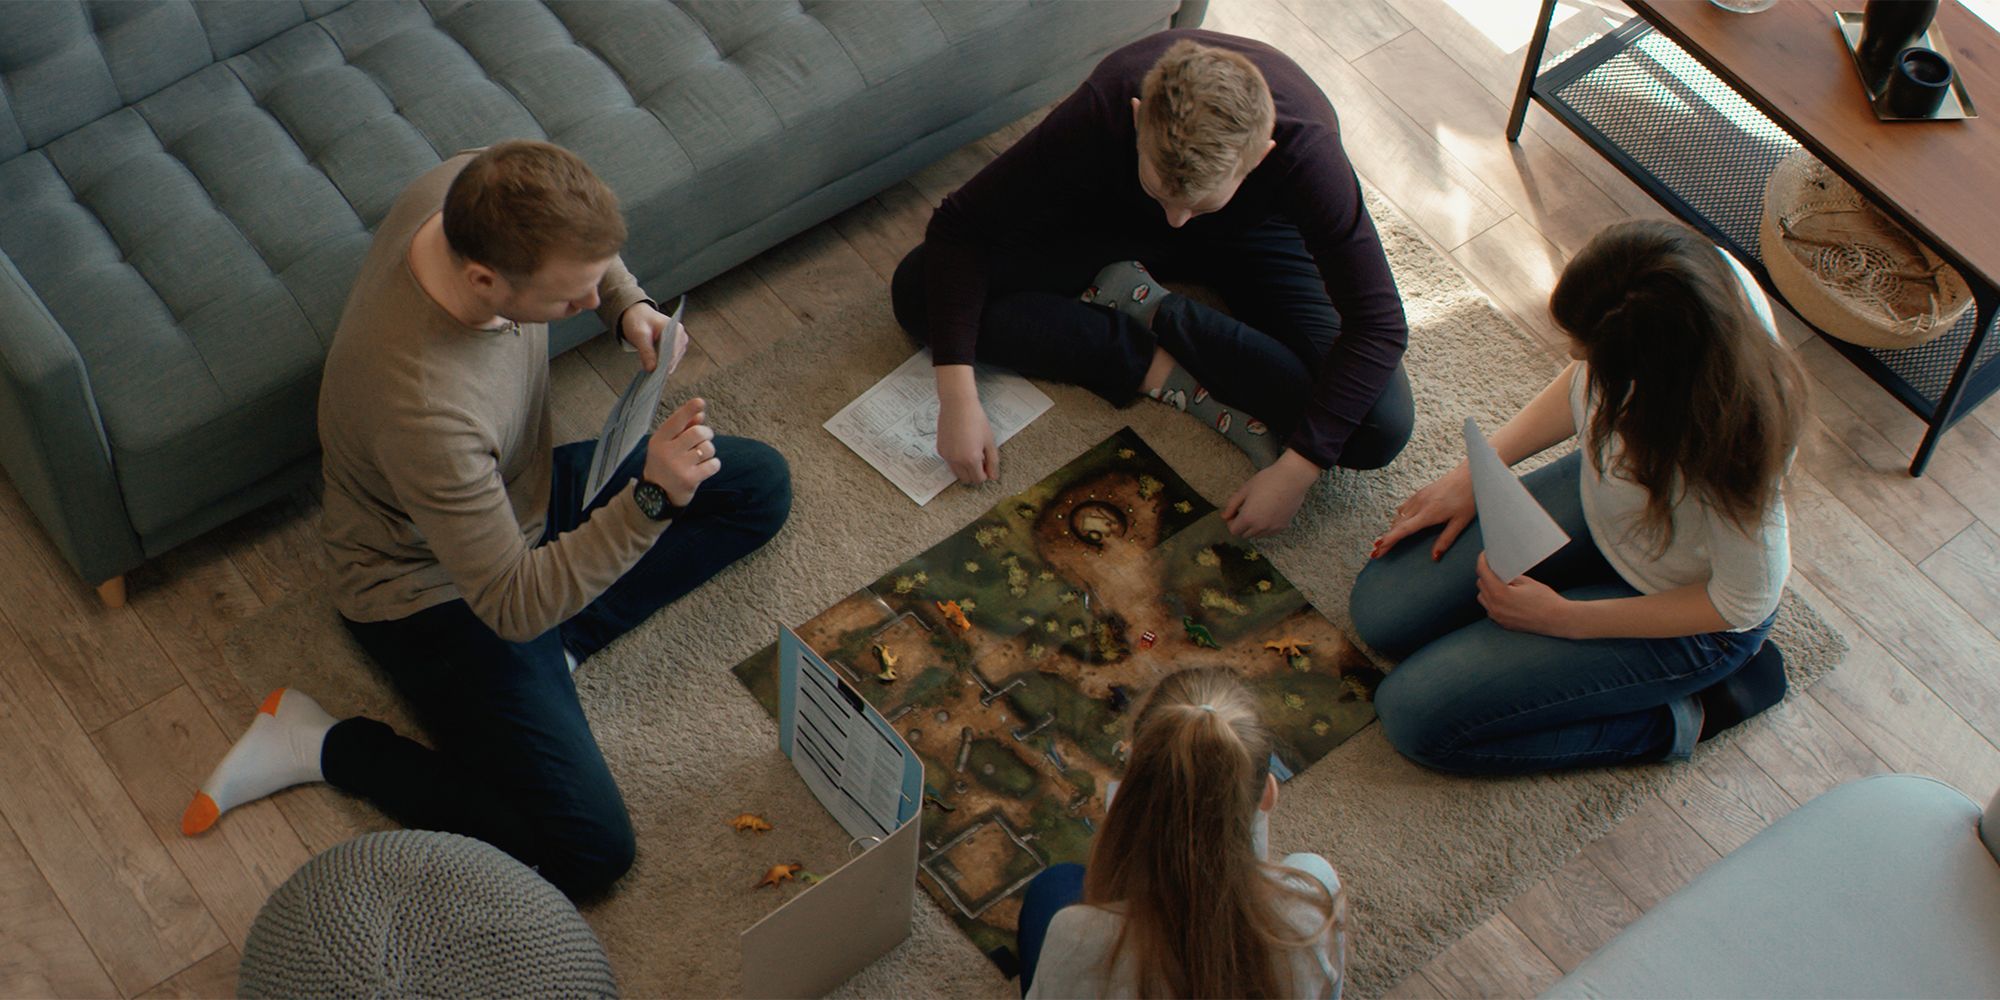 Four people on the floor in front of the sofa around a Dungeons & Dragons board